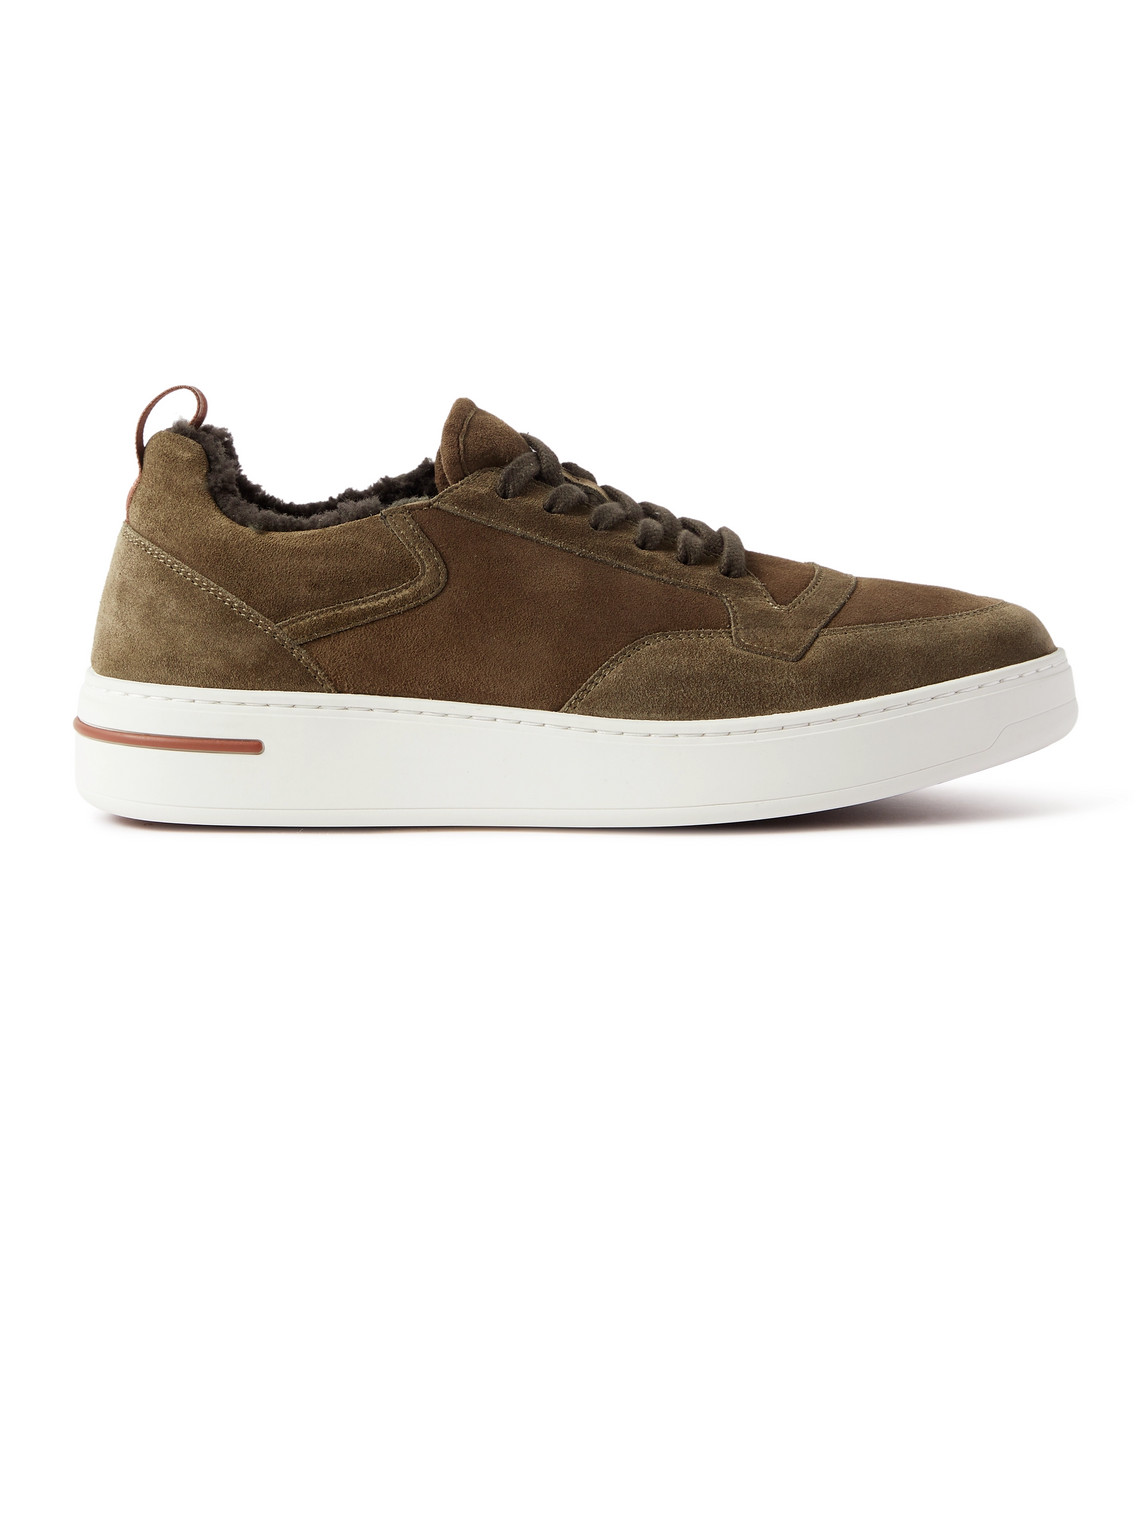 Newport Shearling-Trimmed Two-Tone Suede Sneakers